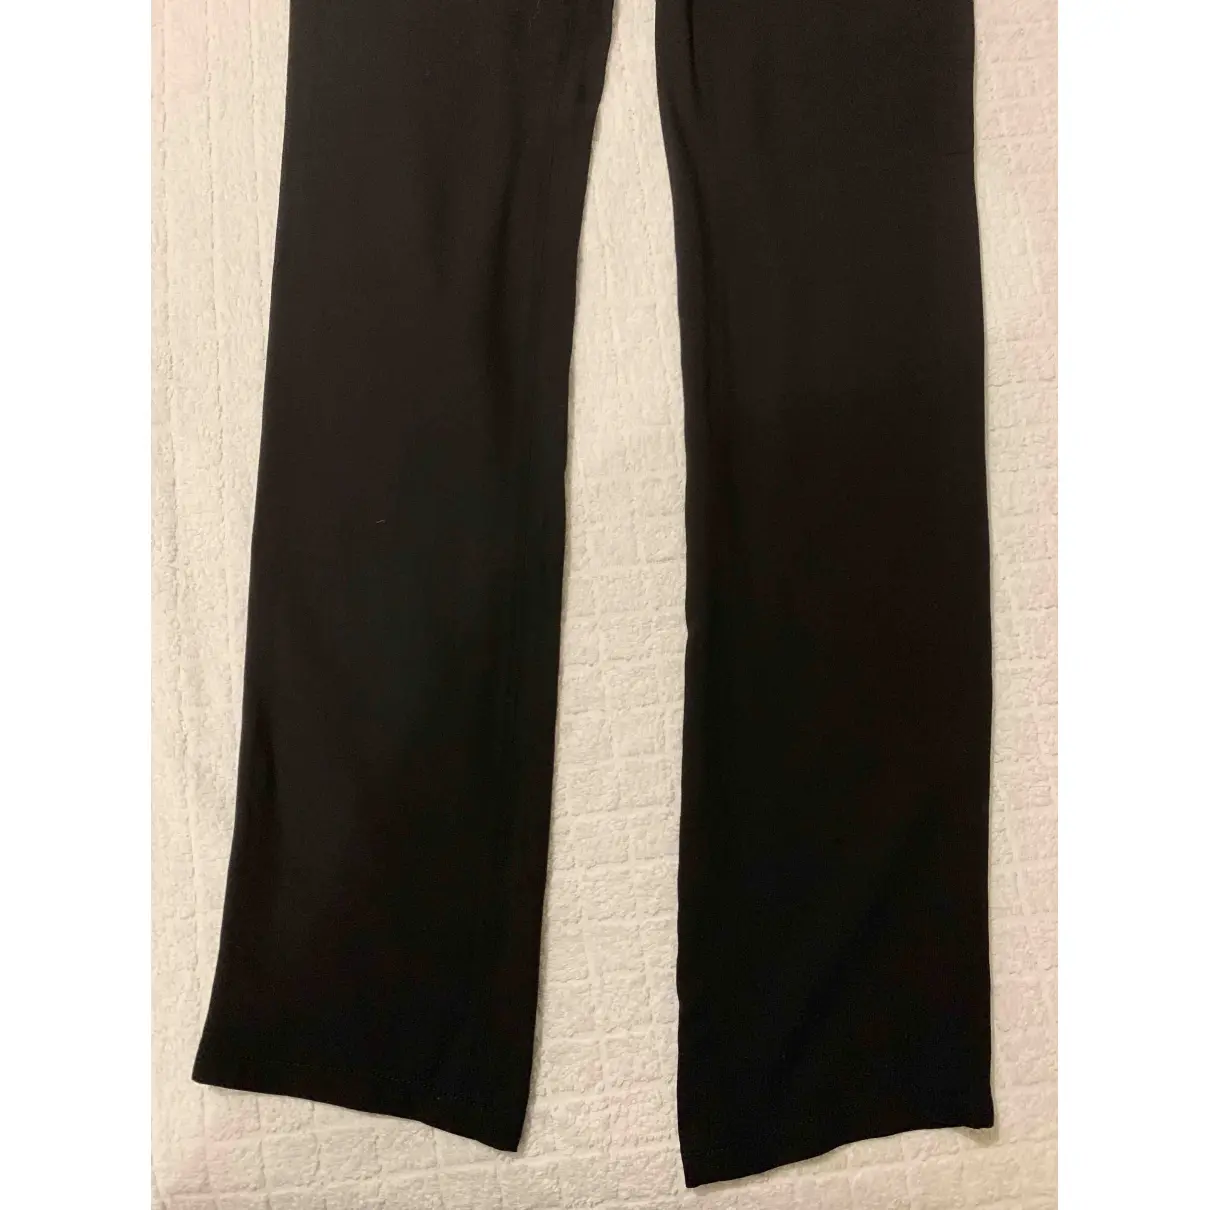 Buy Anthony Vaccarello Carot pants online